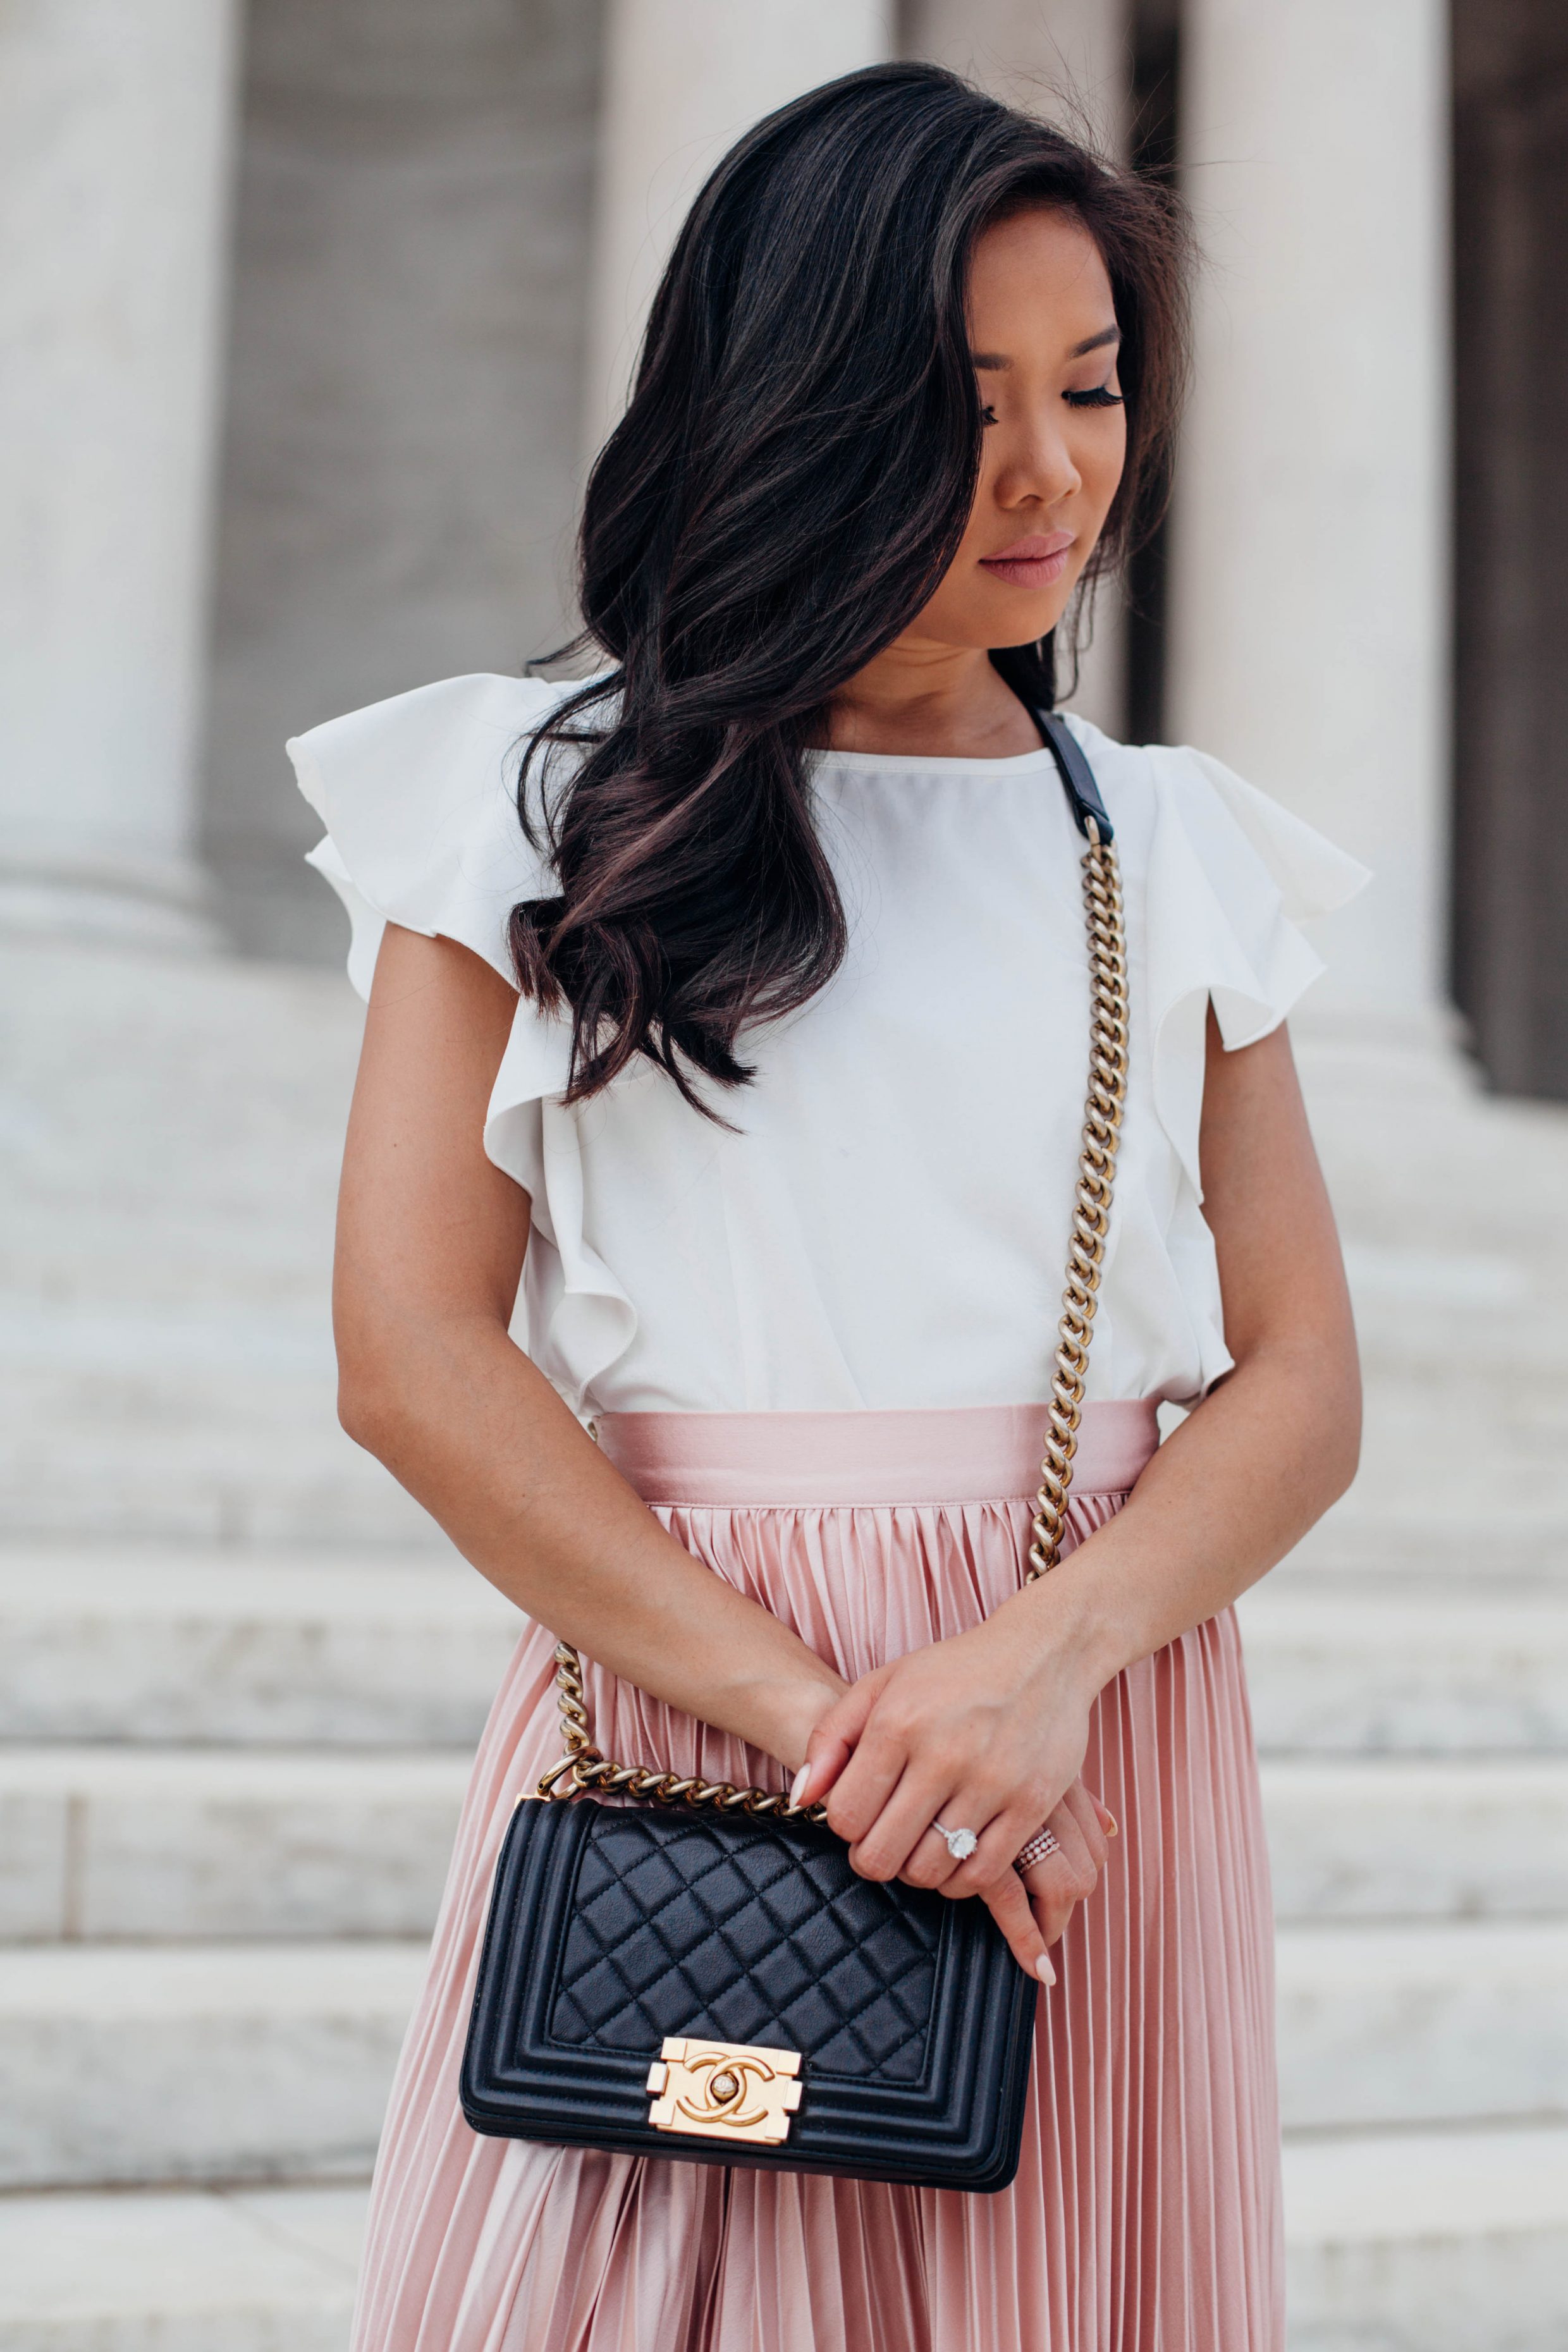 COLOR & CHIC | Pink Pleated Maxi Skirt